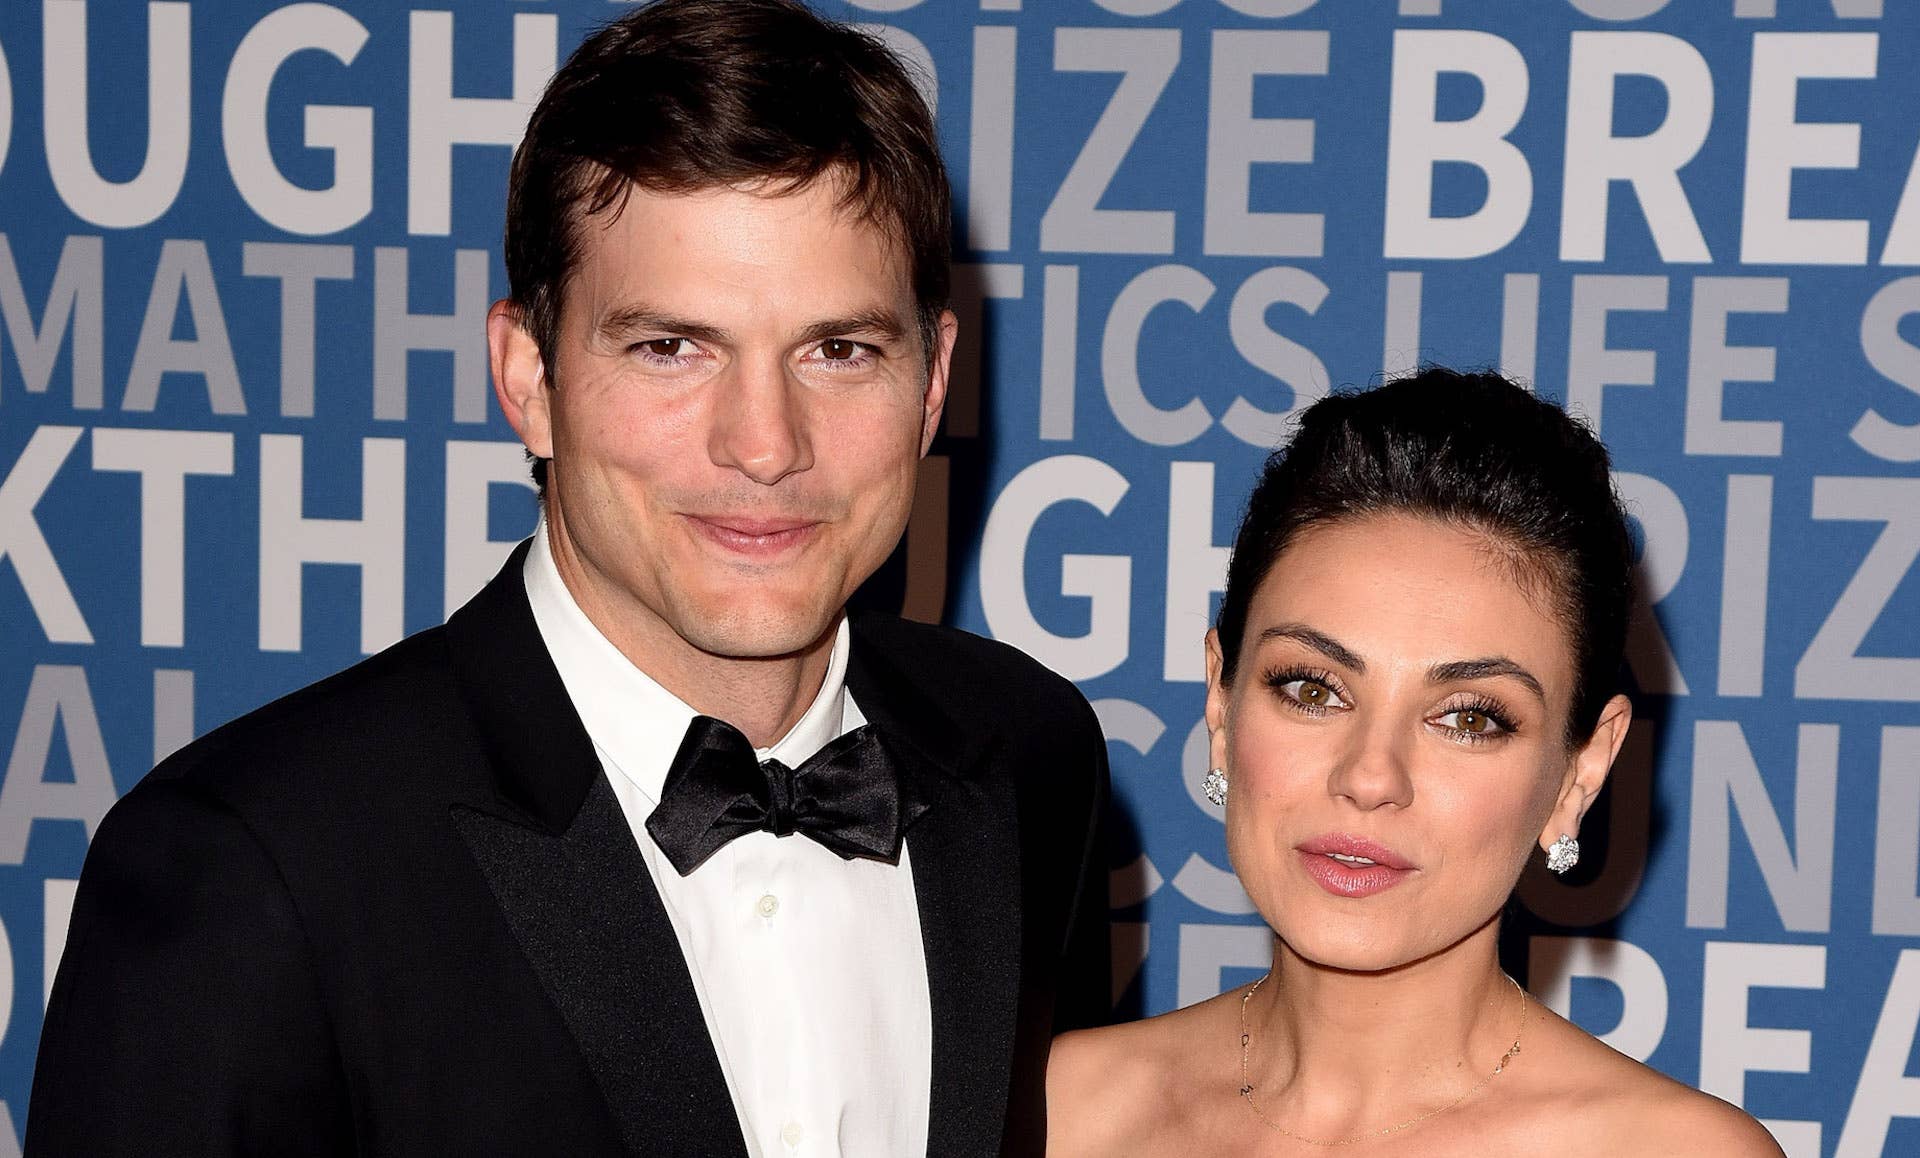 Ashton Kutcher and Mila Kunis attend the 6th Annual Breakthrough Prize at NASA Ames Research Center